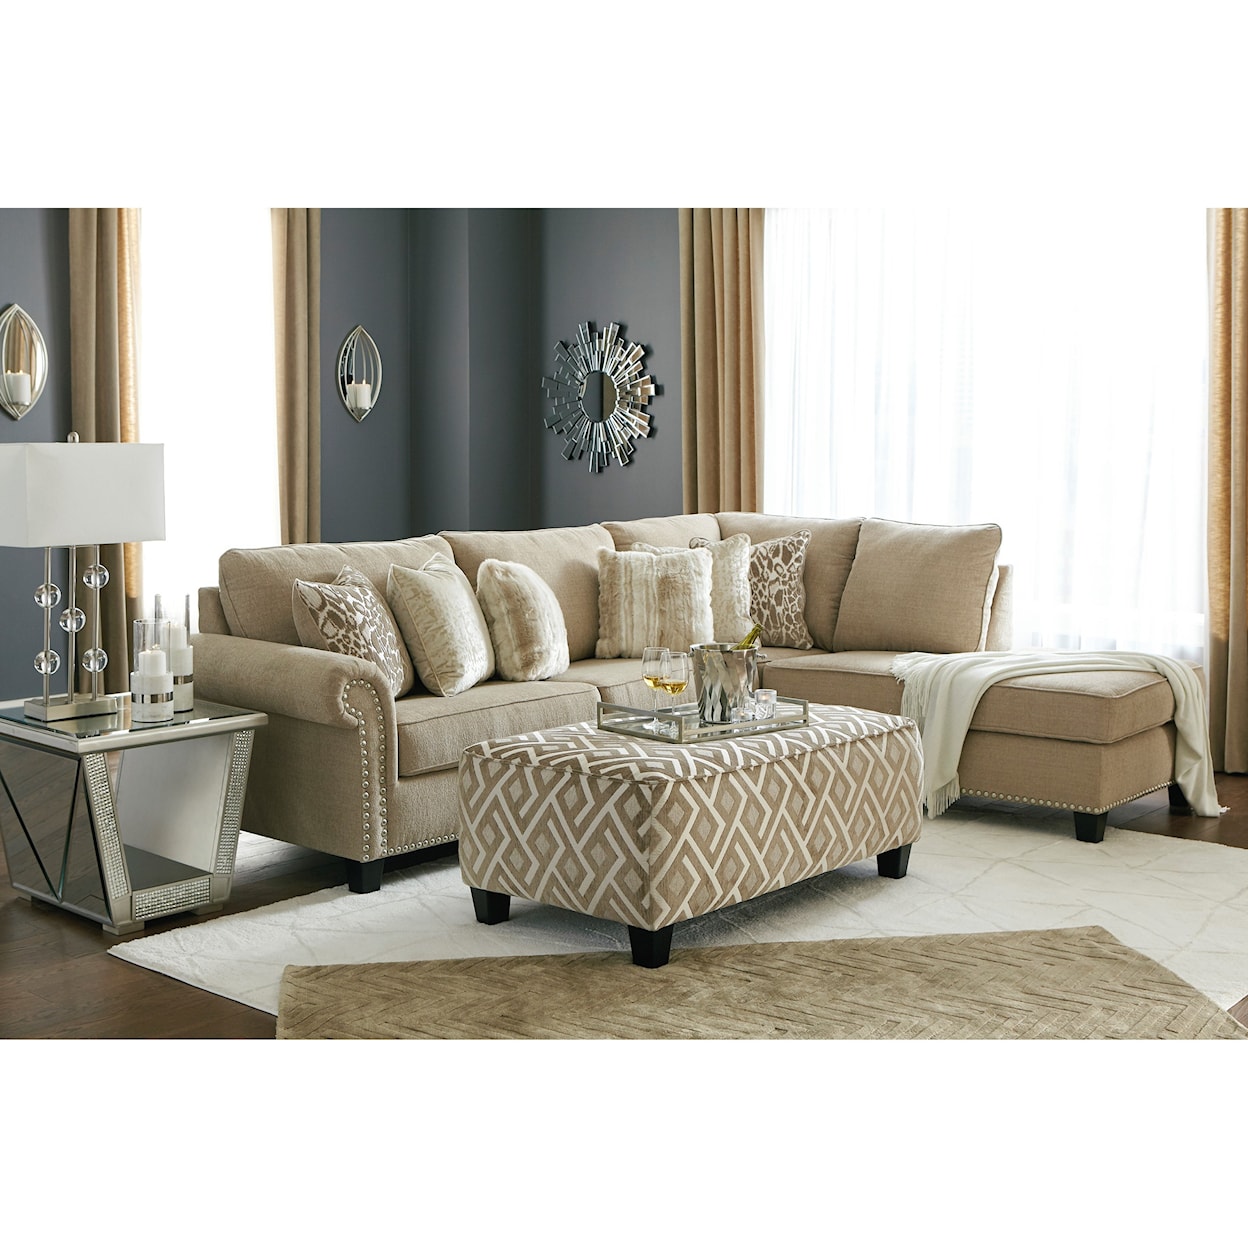 Signature Design by Ashley Furniture Dovemont Living Room Group